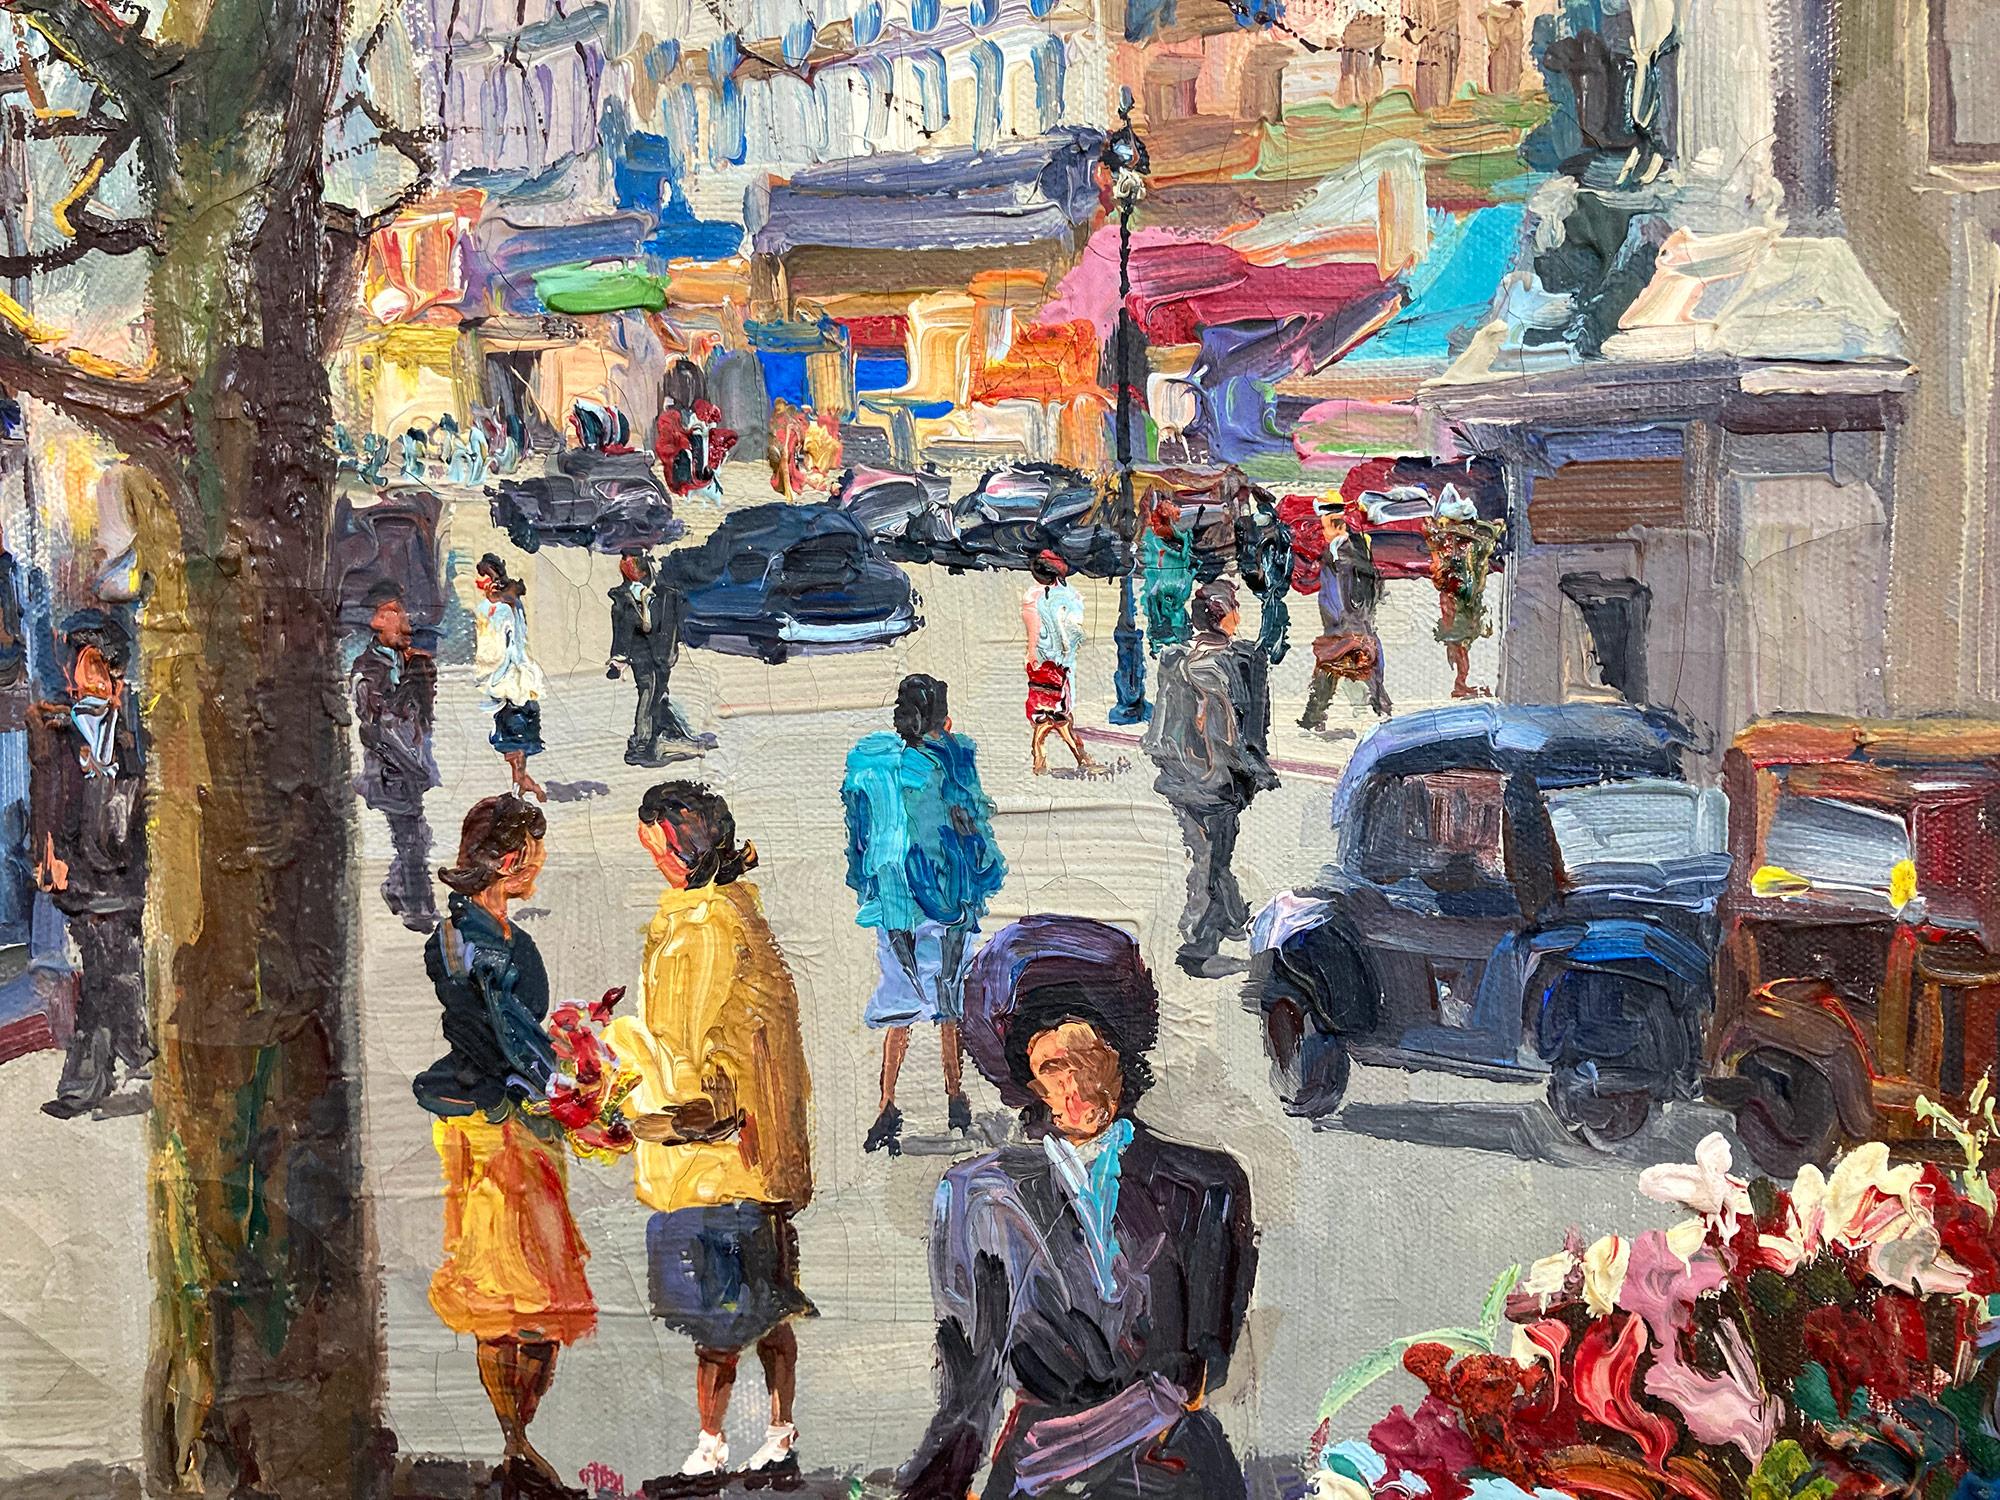 A beautiful oil on canvas painting by the French artist, Jack Prudnik. Prudnik was an American painter known for his colorful cityscapes depicting the times of his generation. This painting is a wonderful example of his work from the prime of his